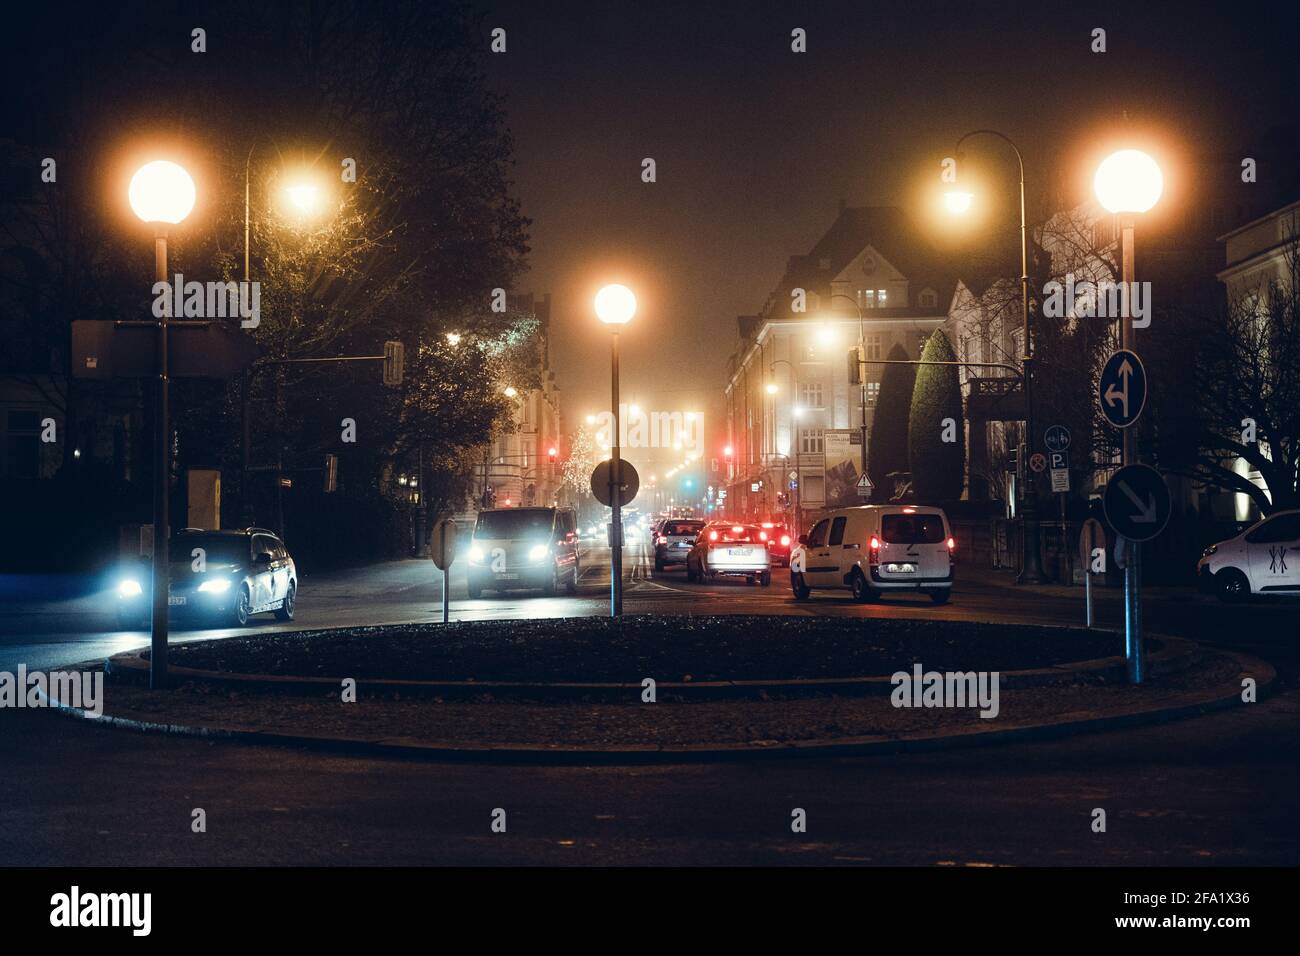 Avenue (road) during a rainy night in Munich, Bavaria, Germany. Traffic signs and roundabout. headlights and traffic jam light up the city scene. Stock Photo